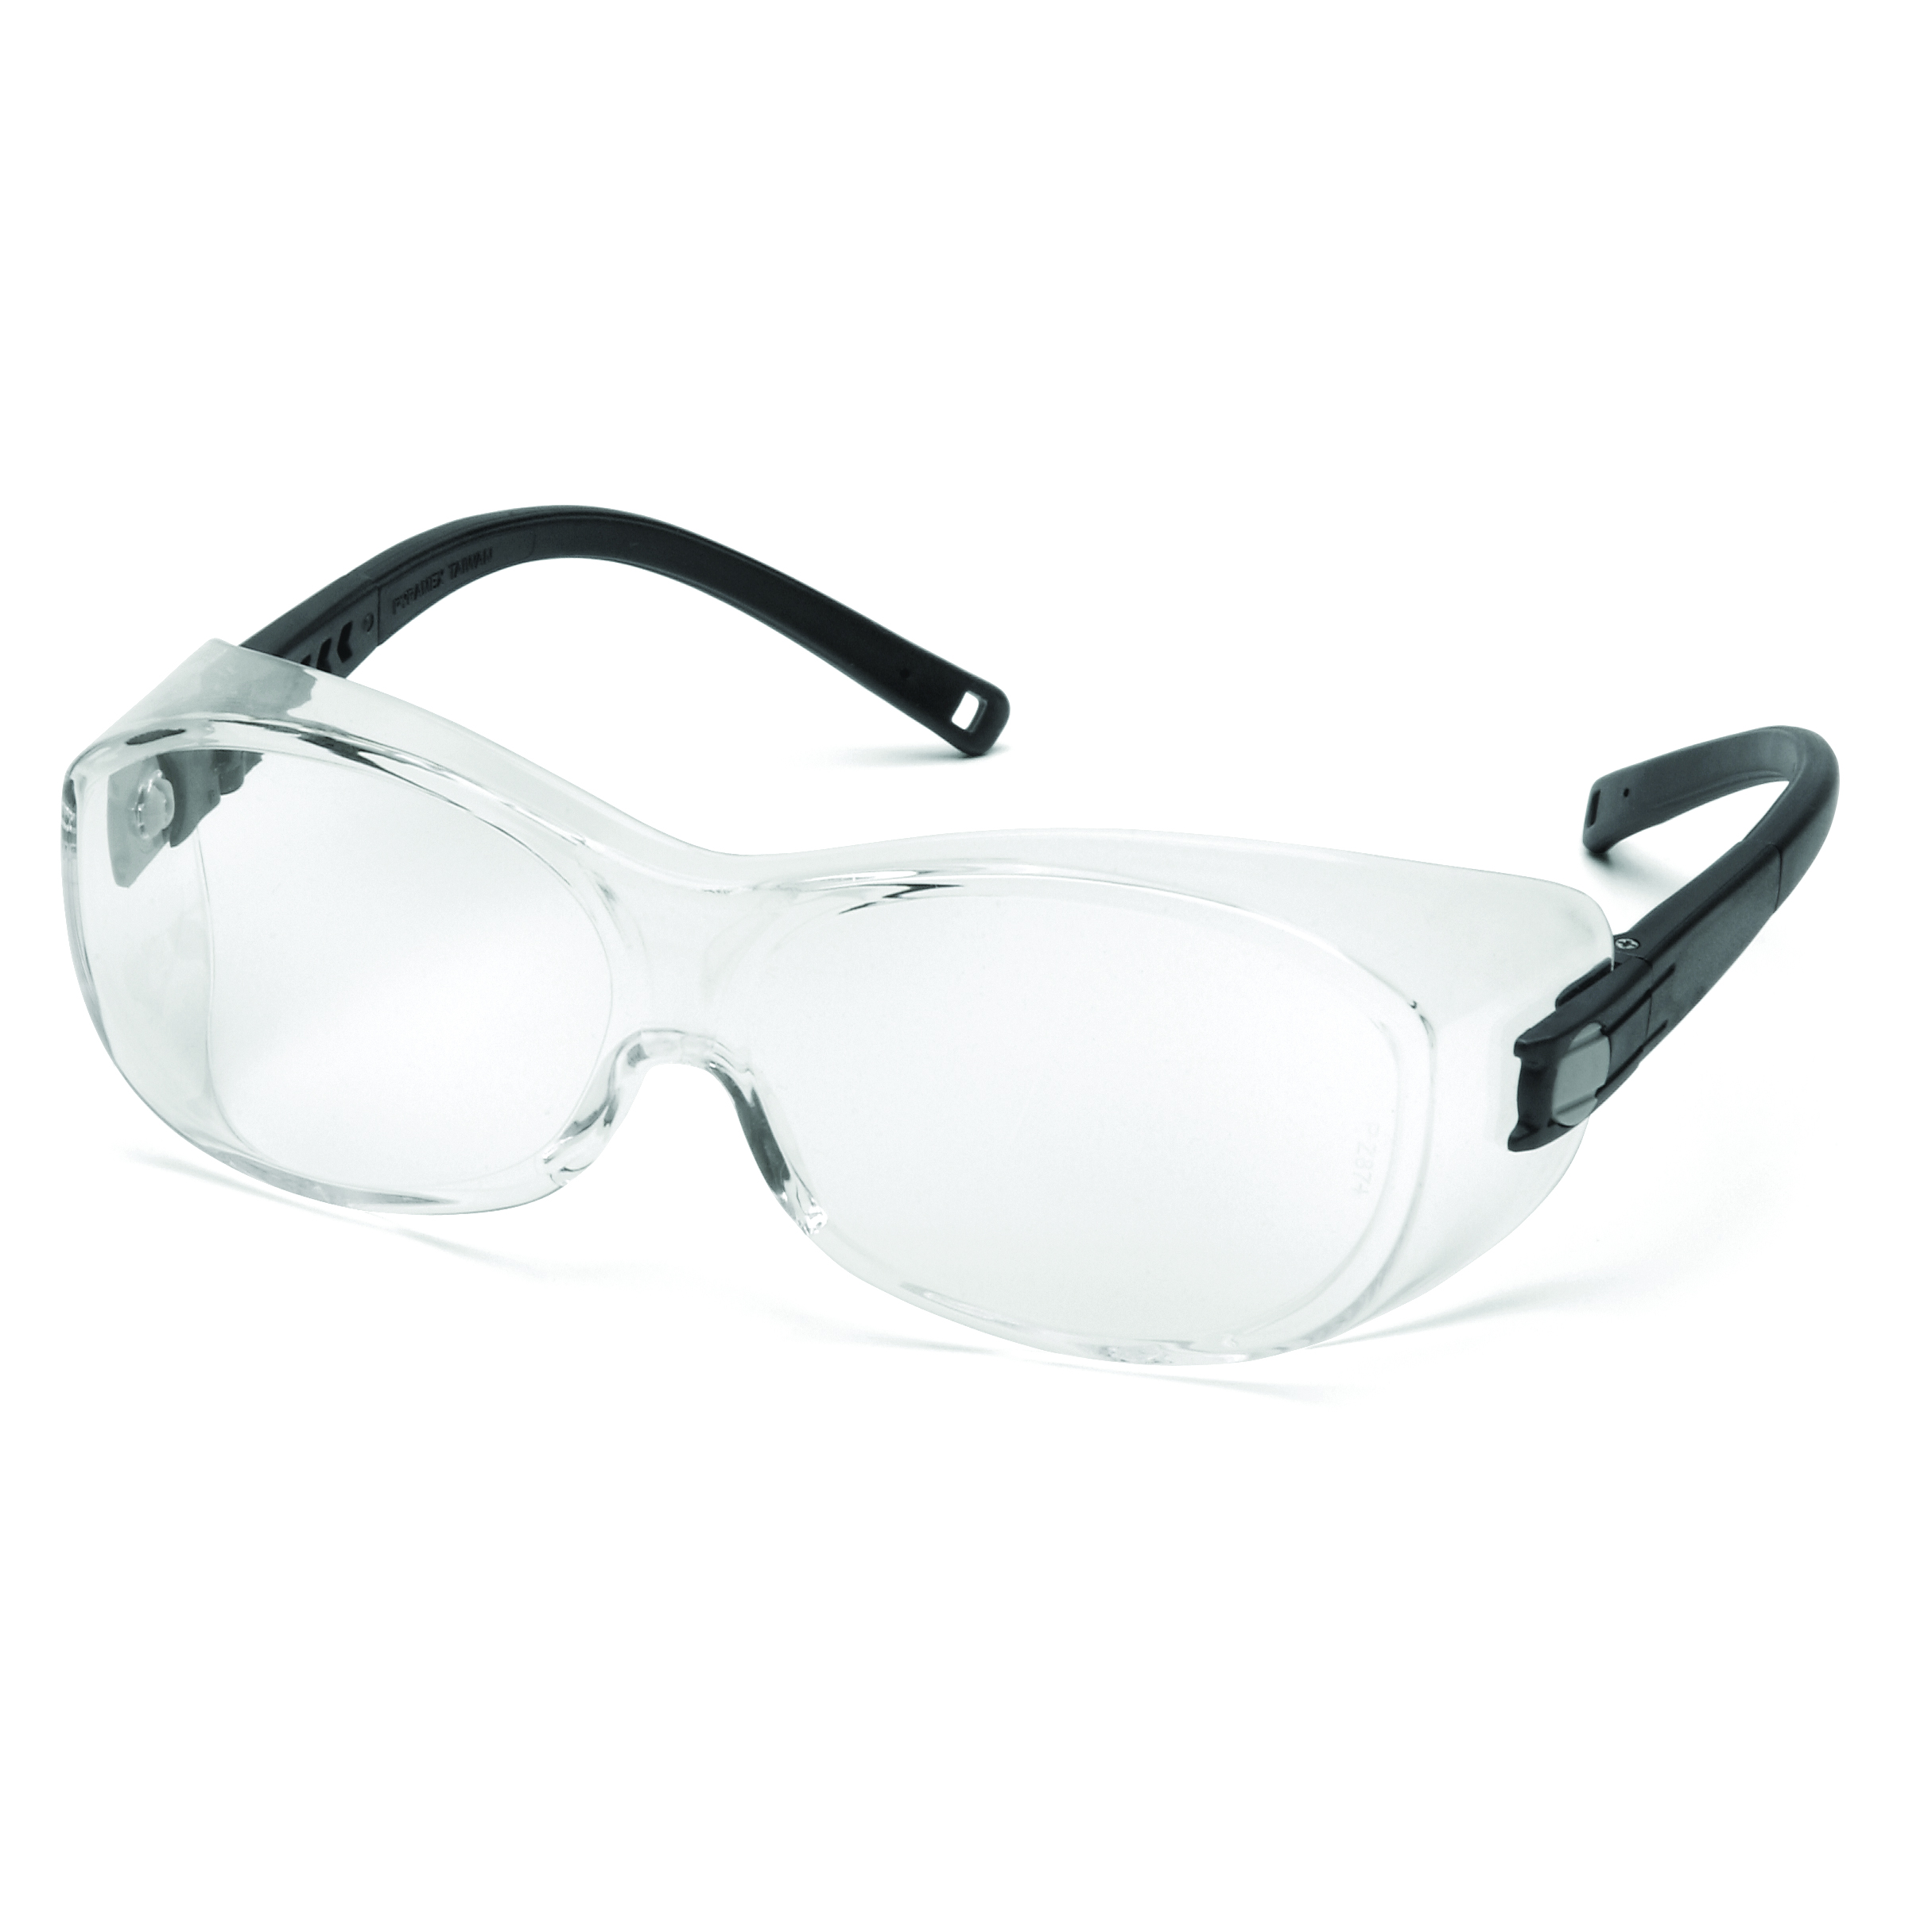 Pyramex OTS Over Rx Safety Glasses with Clear Lens